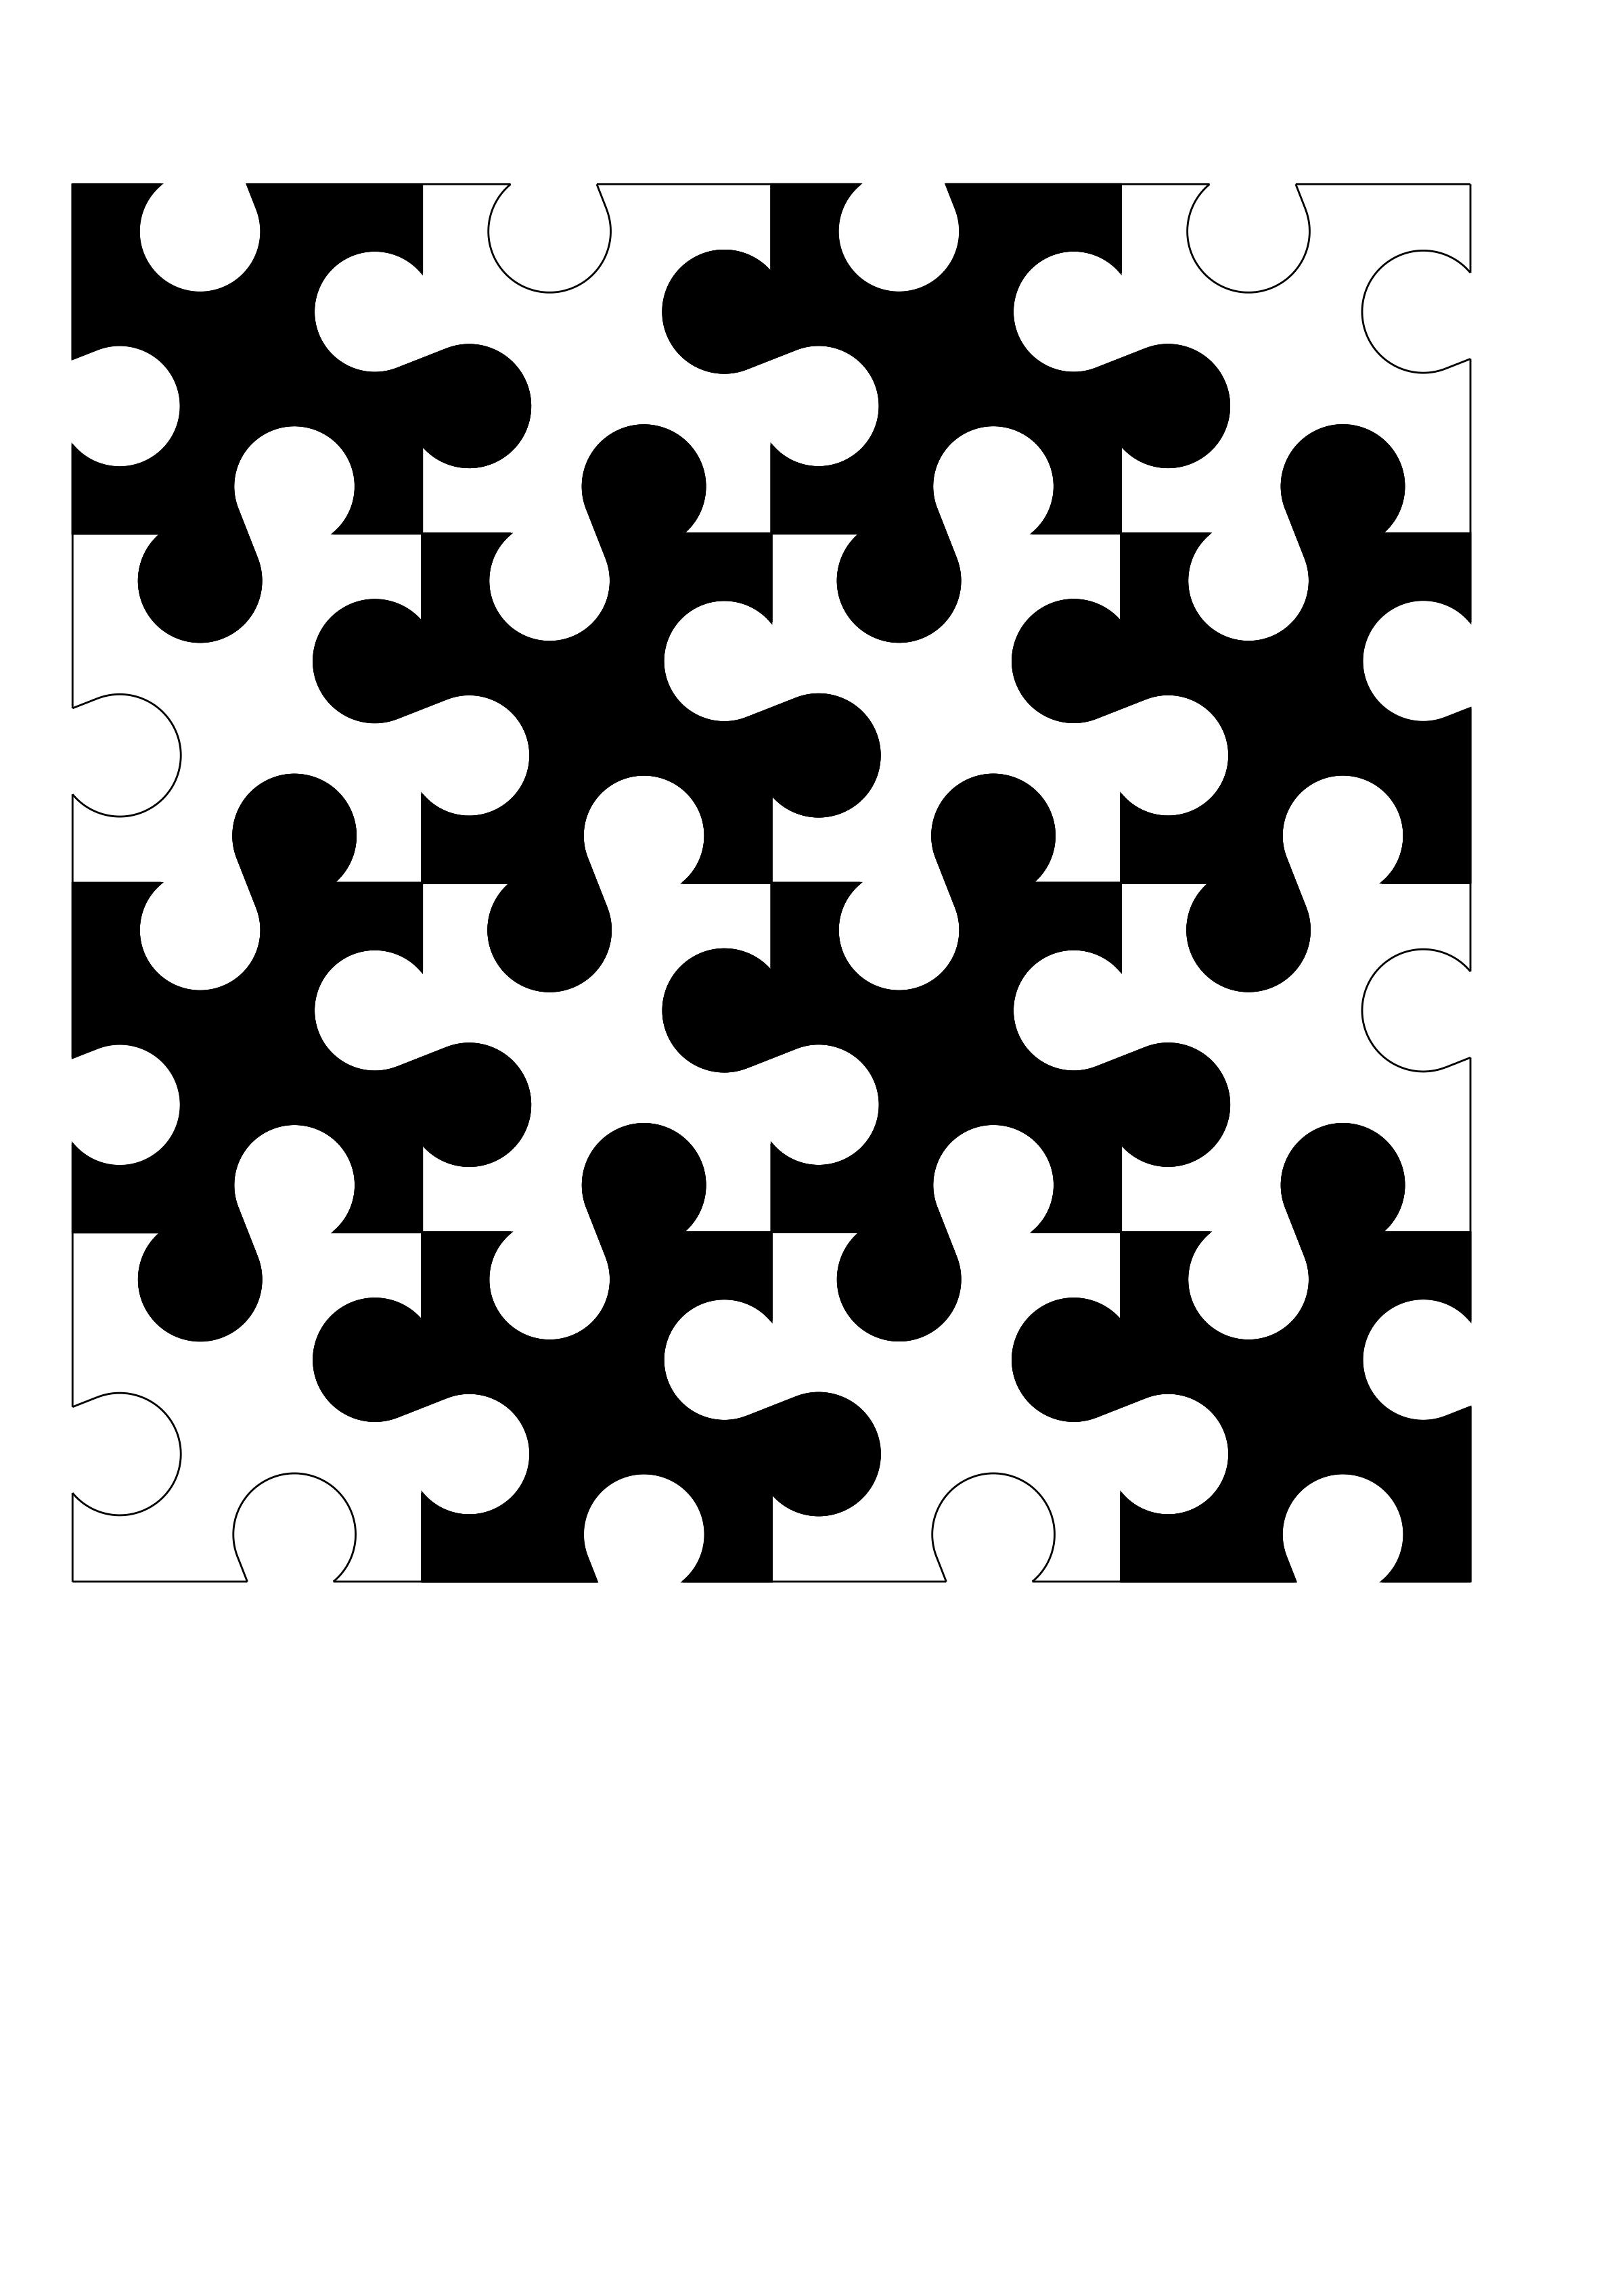 Counterchange pattern allied to the chess board design png